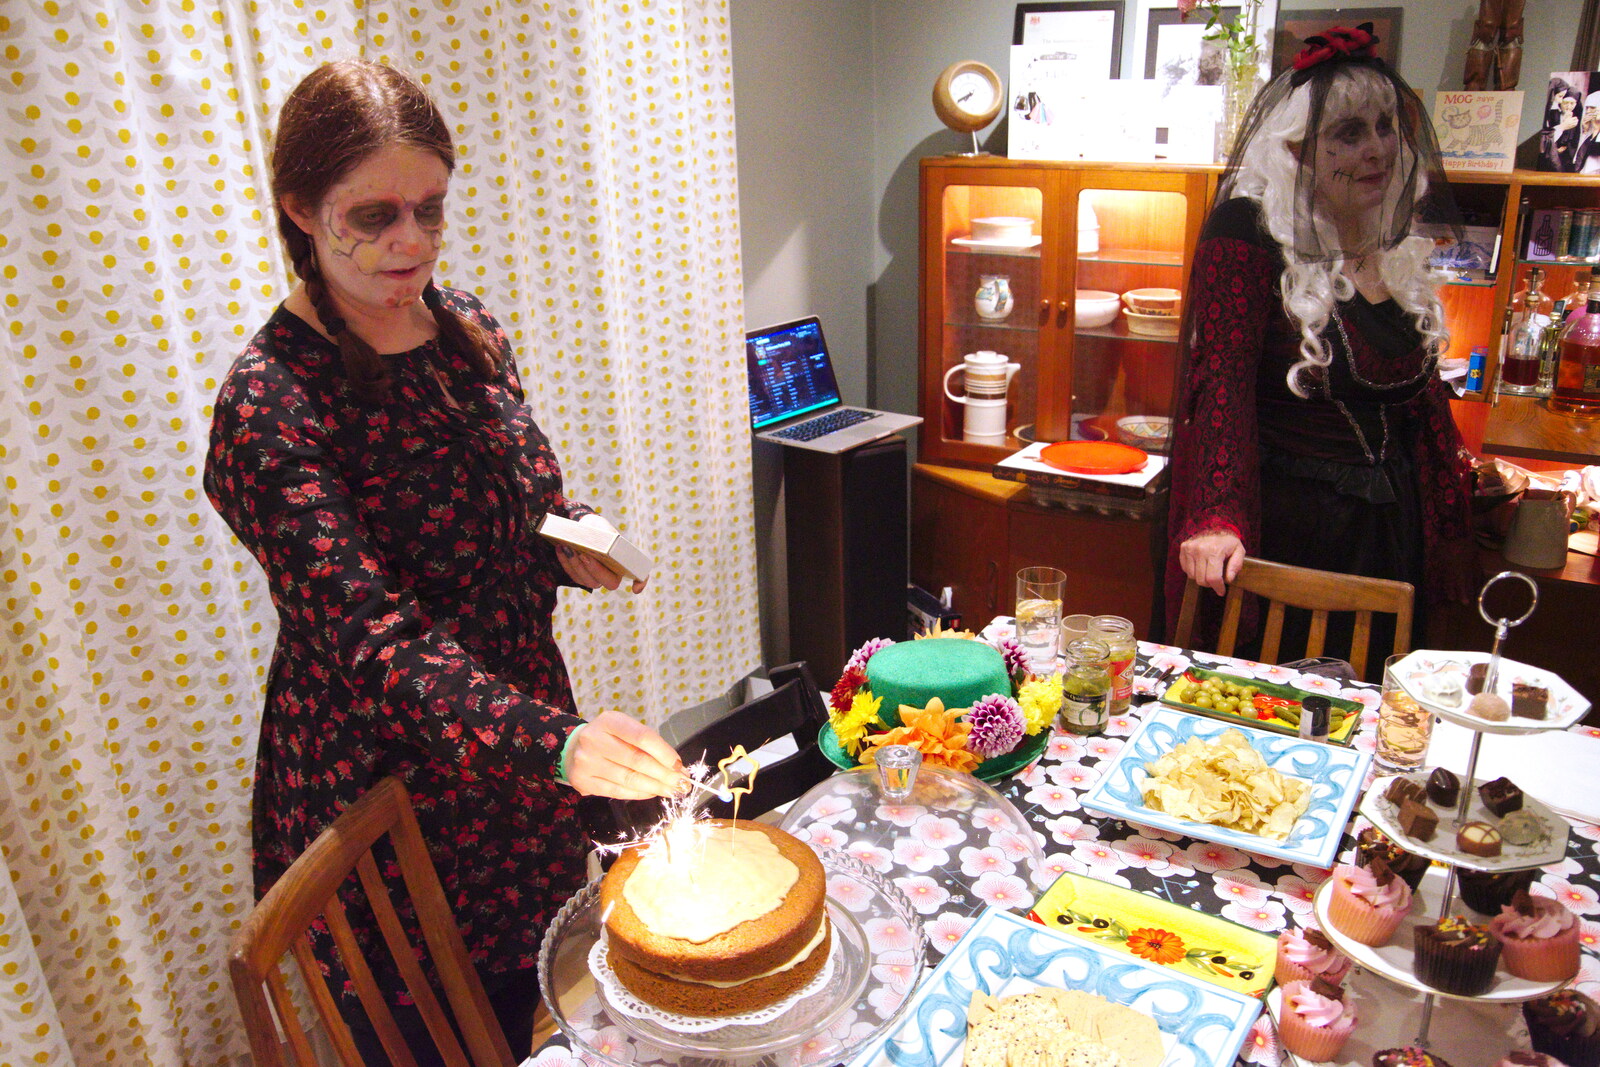 Isobel lights her cake from Day of the Dead Party at the Oaksmere, Brome, Suffolk - 2nd November 2019